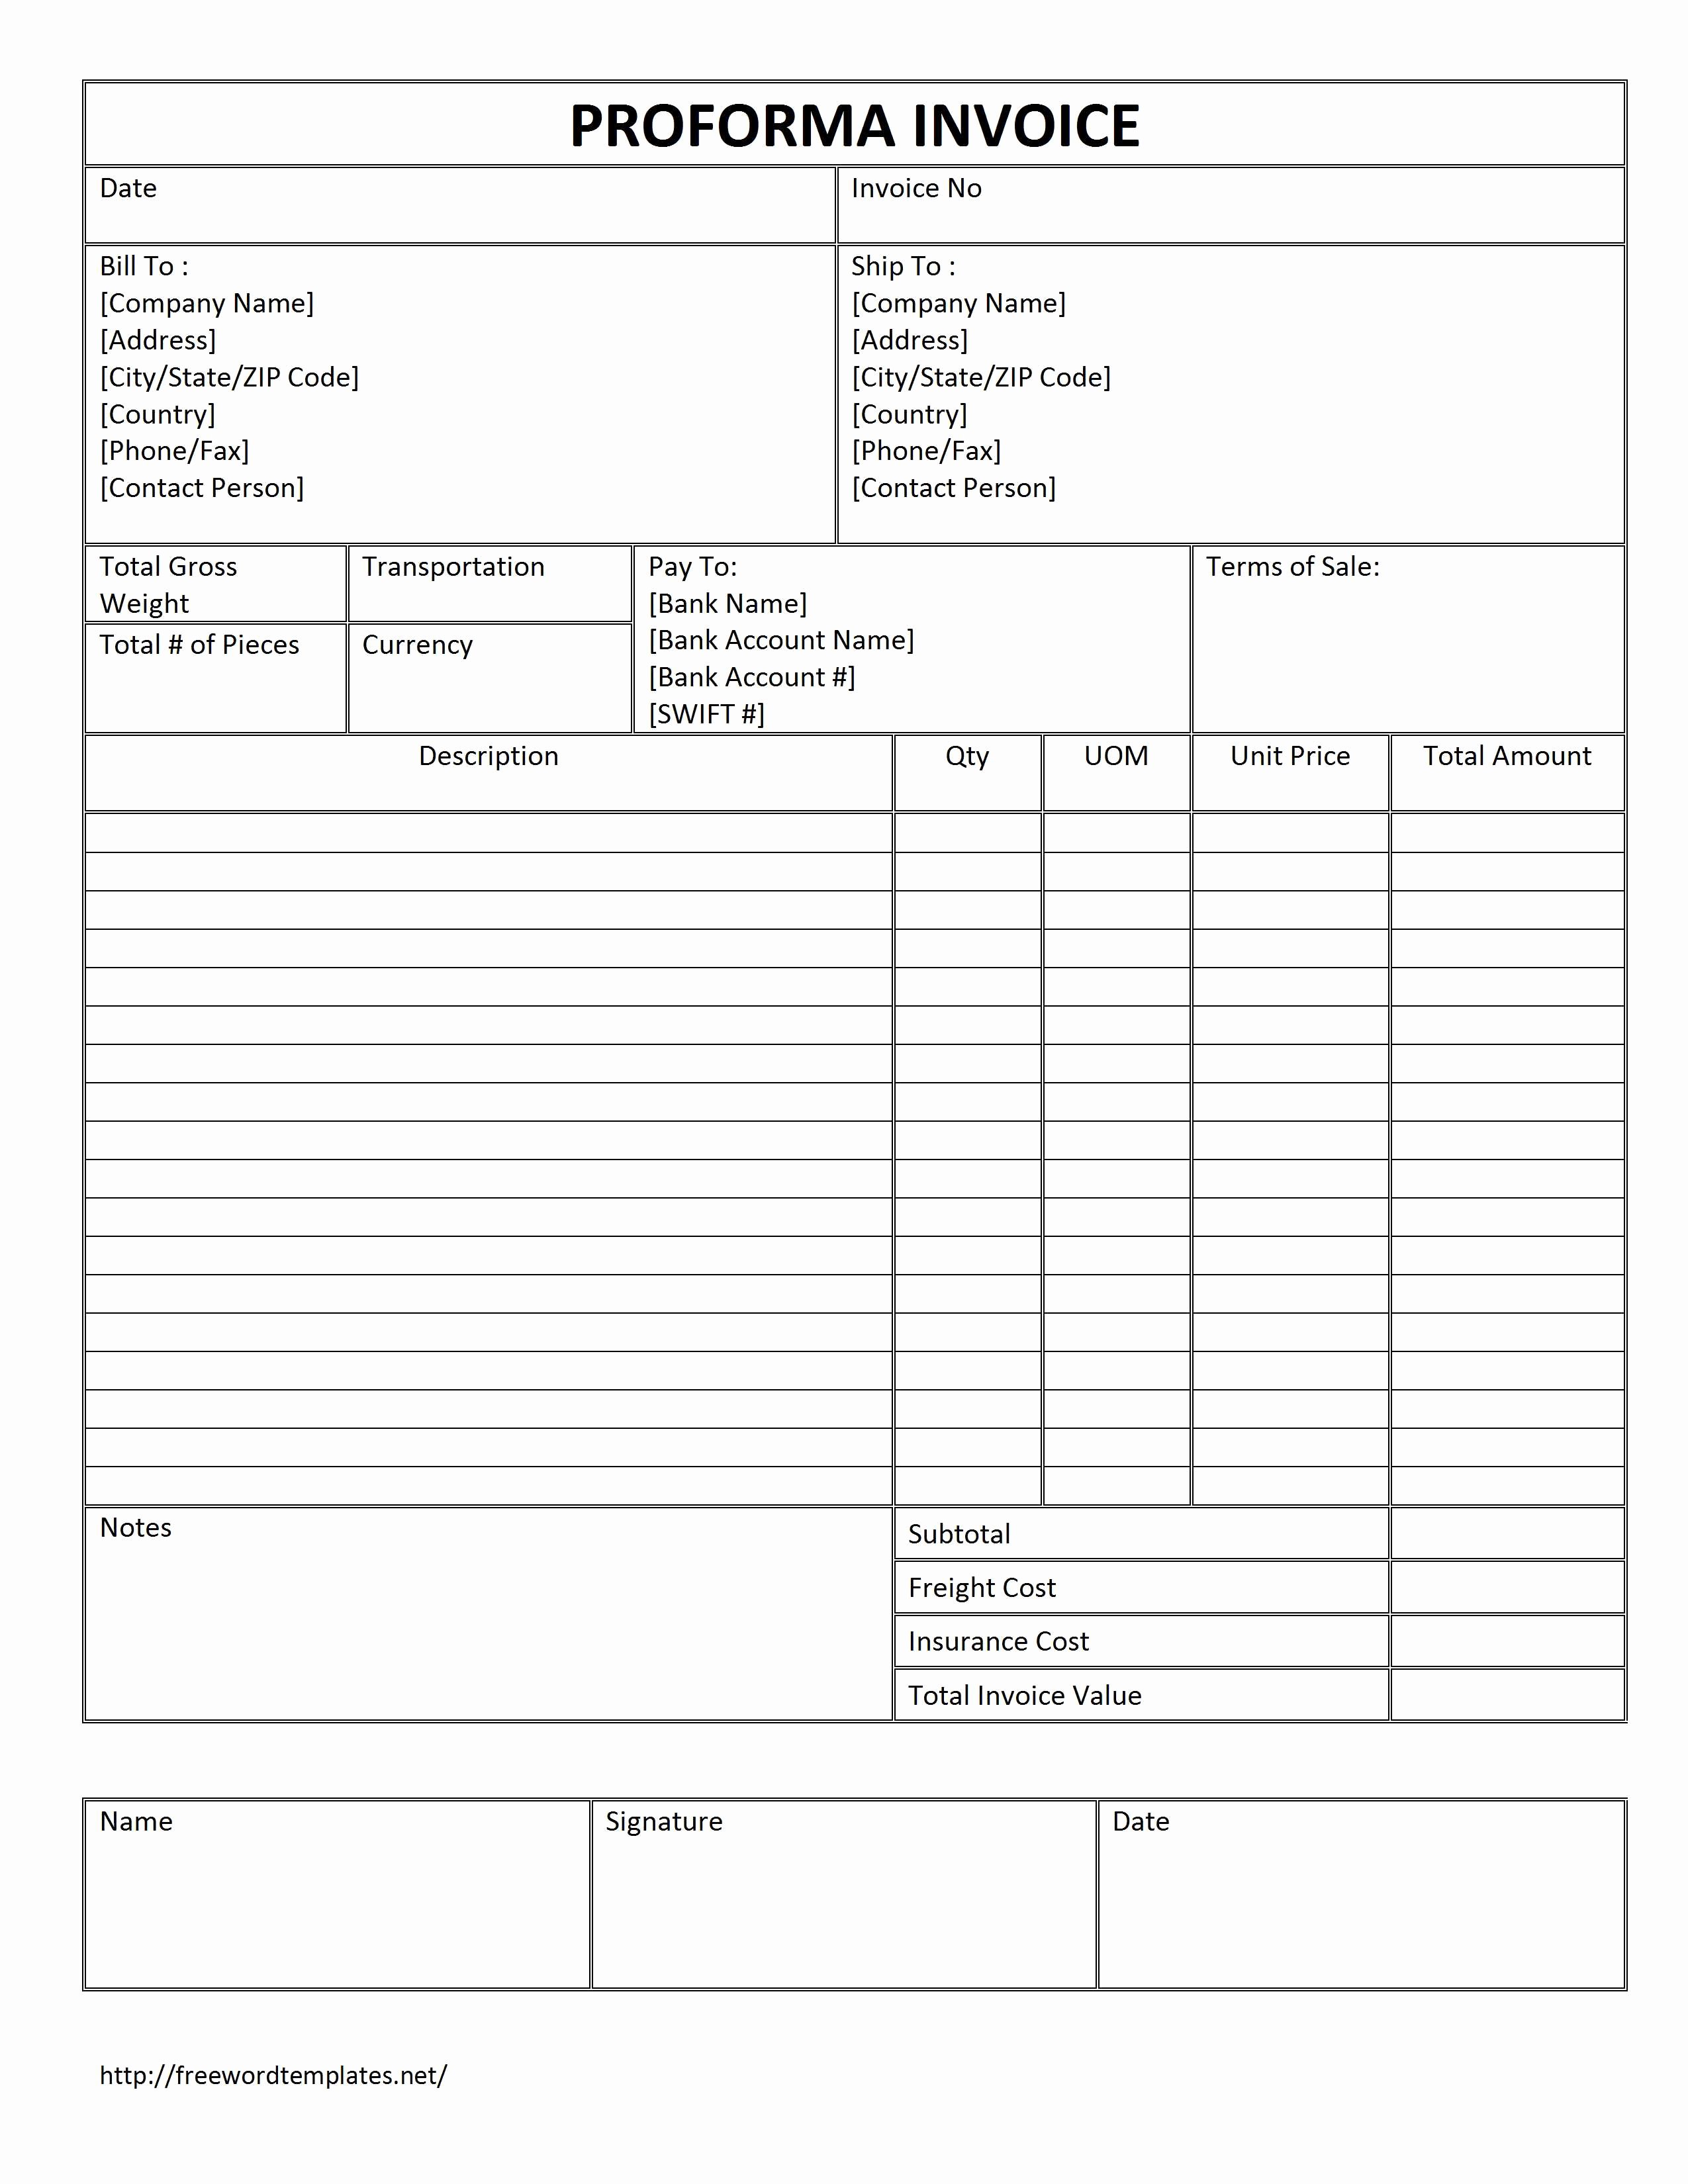 Sale Invoice Template Word Awesome Proforma Invoice